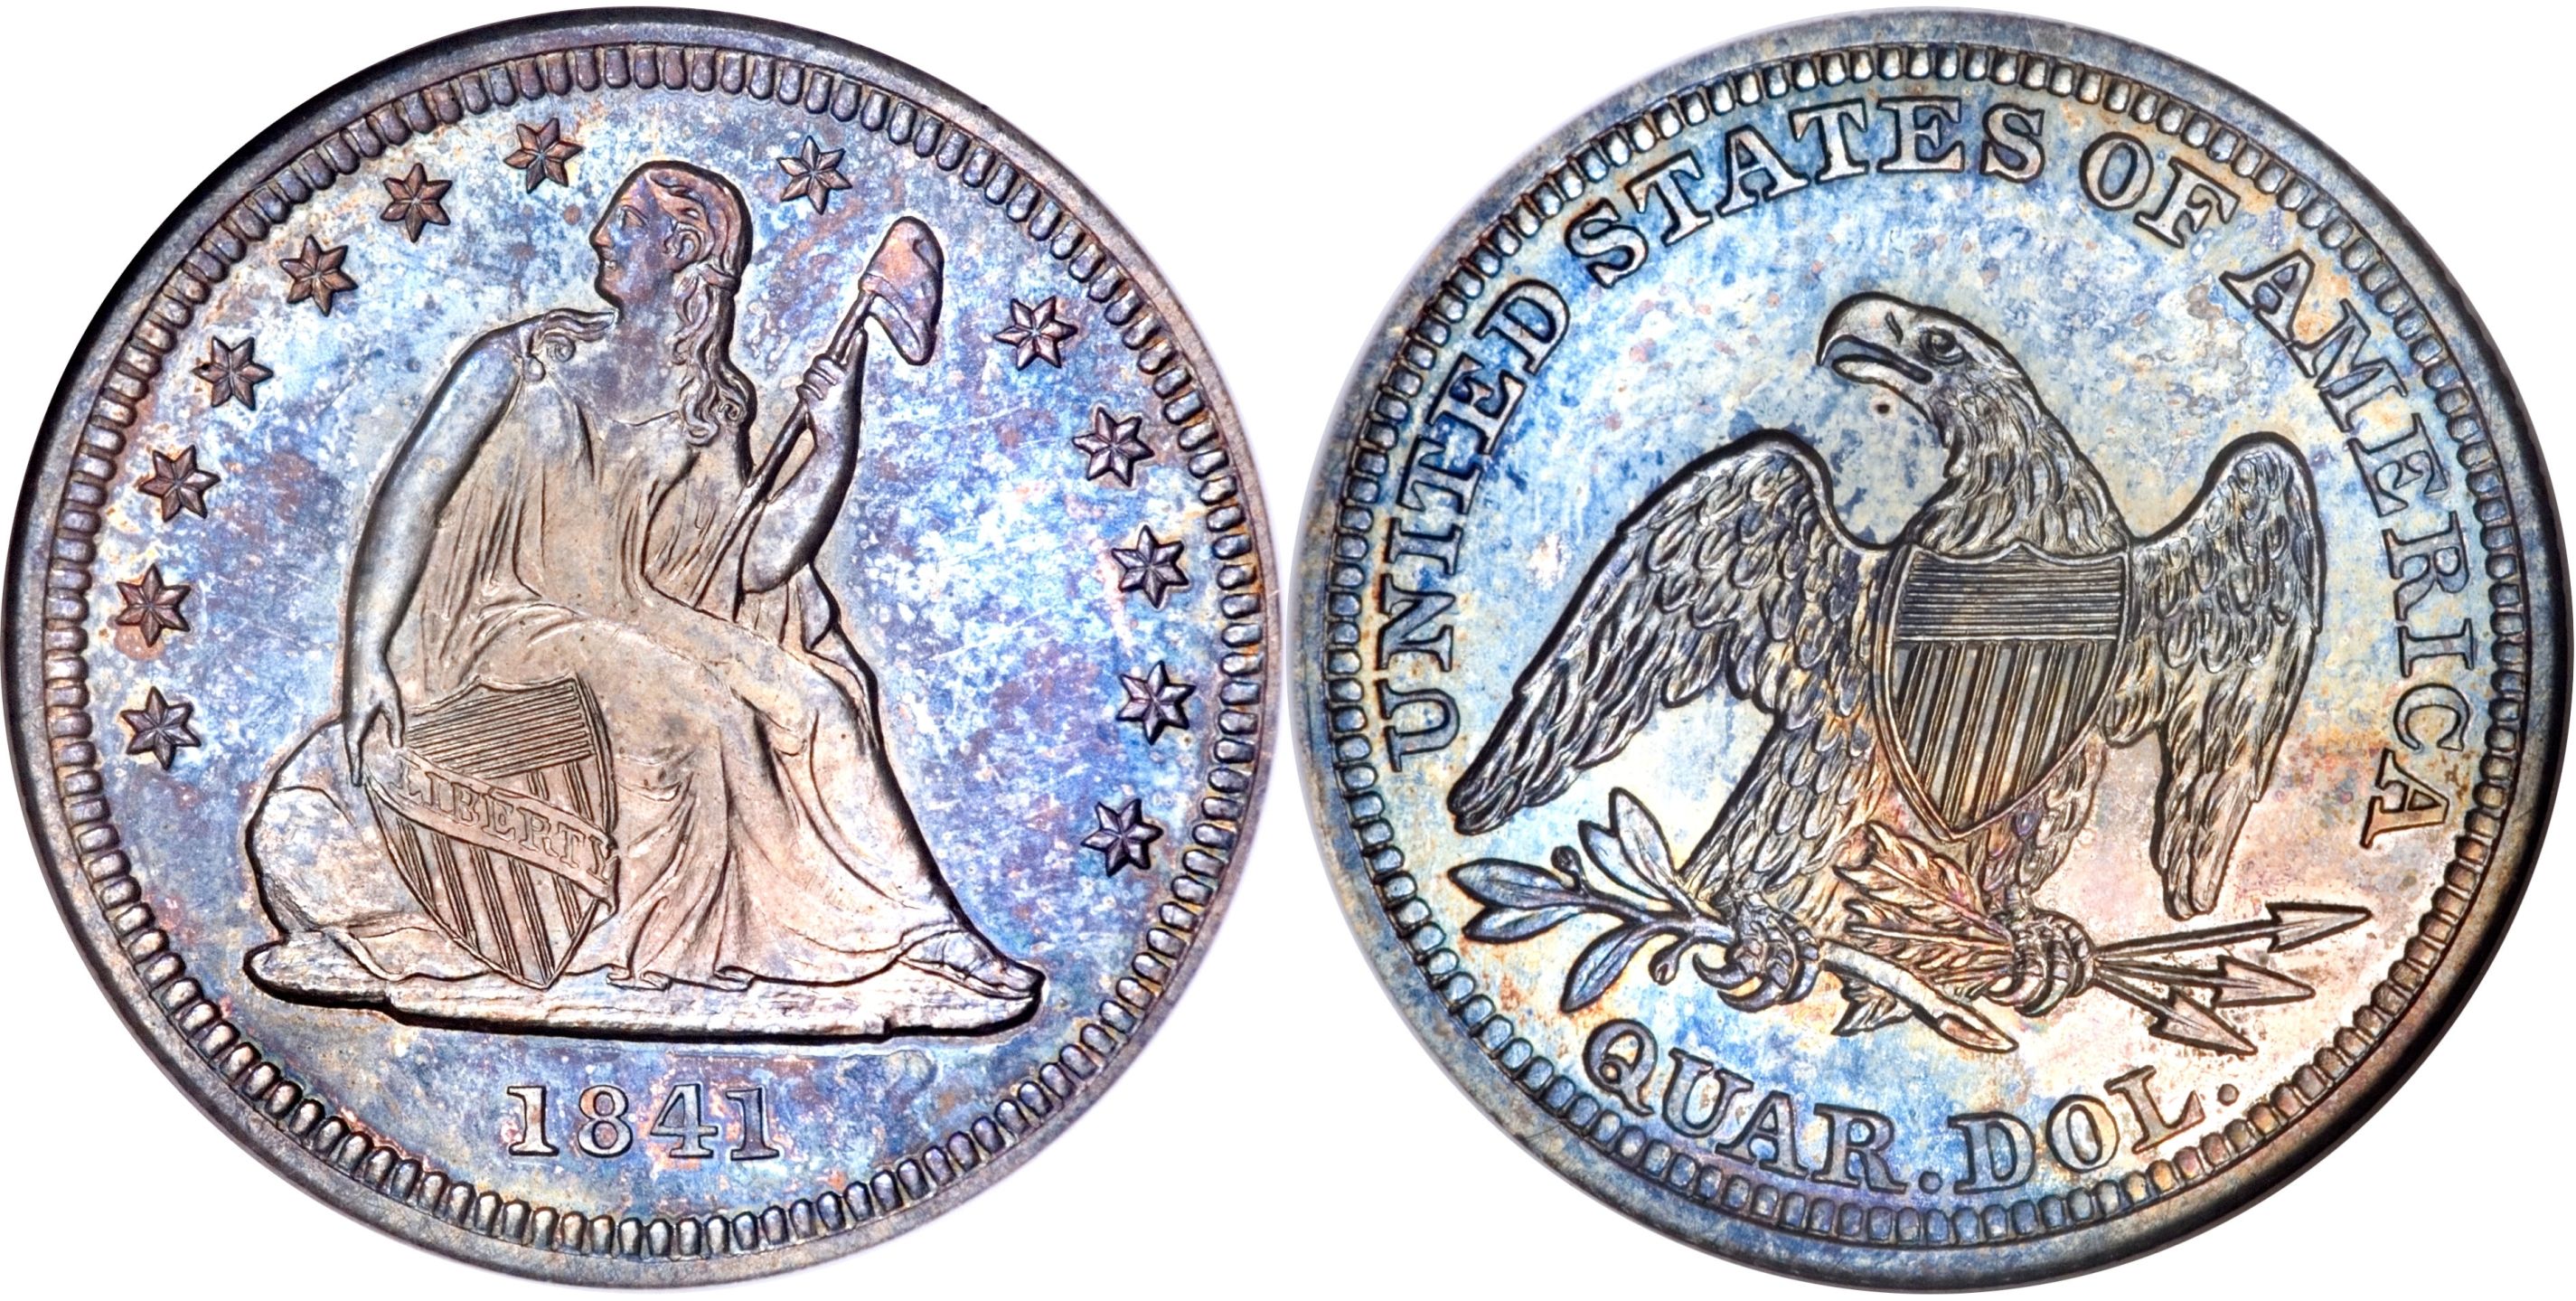 1841 25C (Proof) Liberty Seated Quarter - PCGS CoinFacts